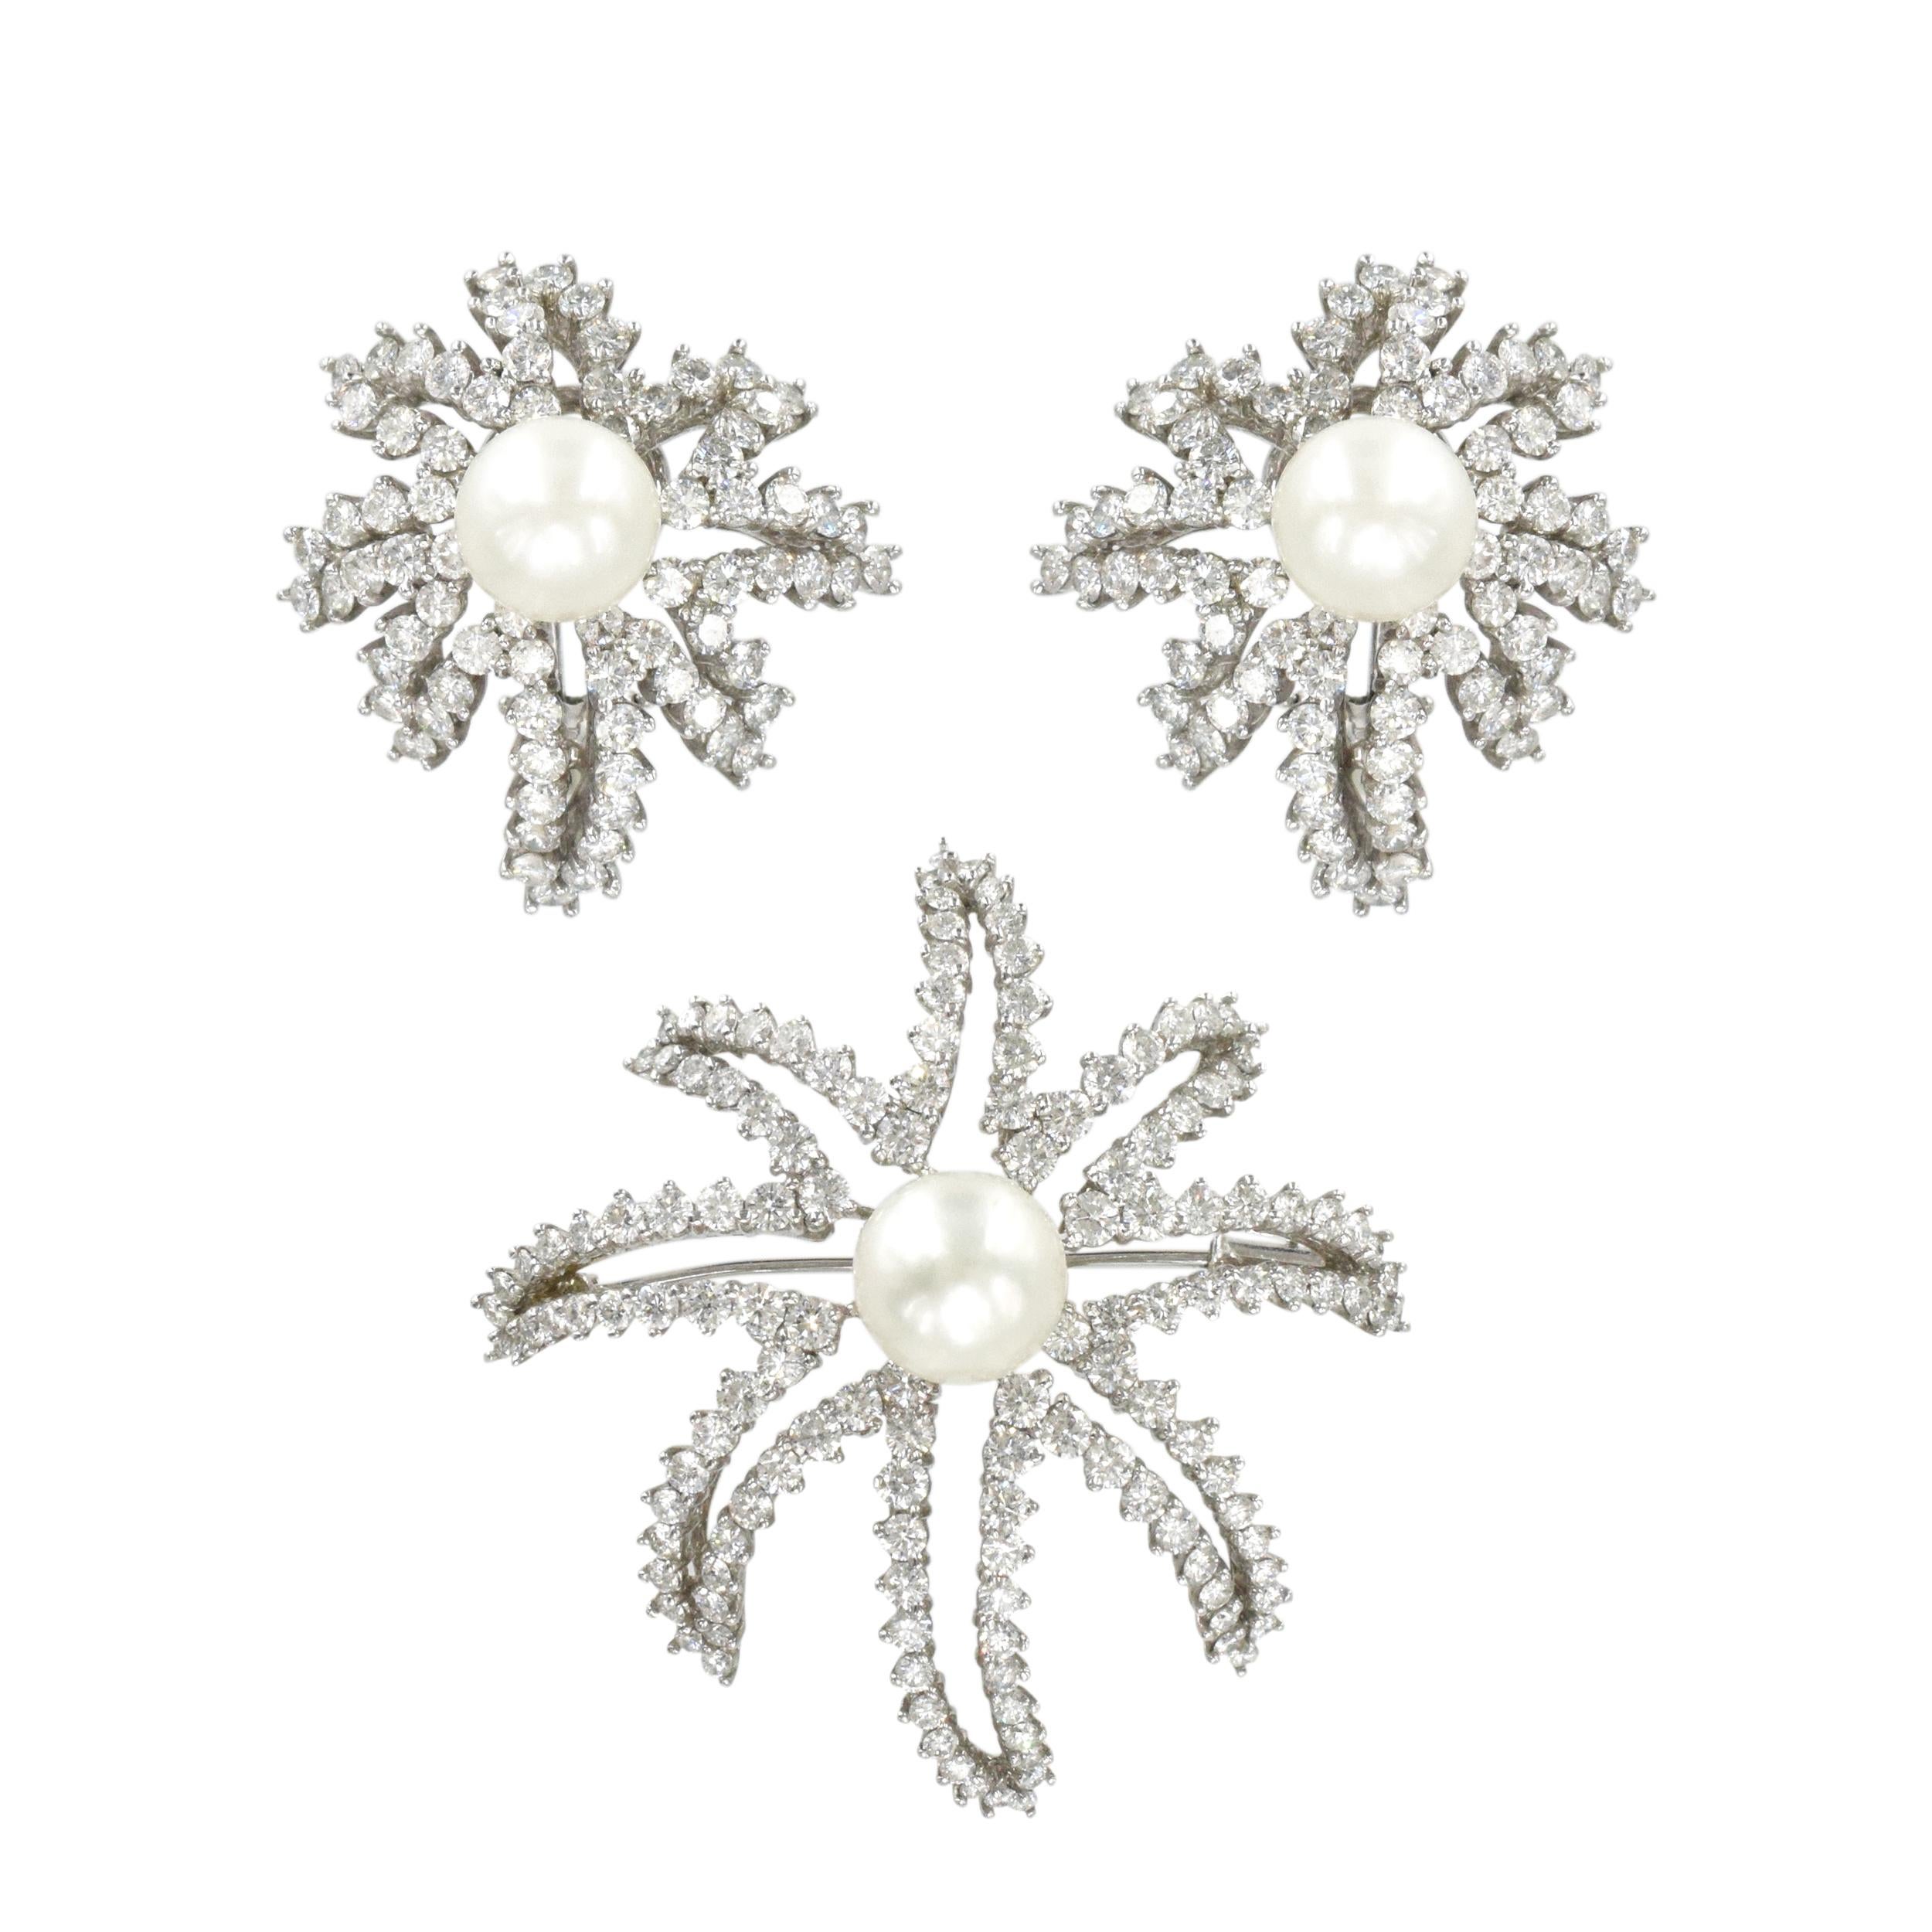 Tiffany & Co. pearl and diamond firework suite in platinum. Circa 1990's. The set consists of pair of open frame firework ear-clip earrings, set with 152 round brilliant cut diamonds with total weight of approximately 4.5 carats color F-G, clarity